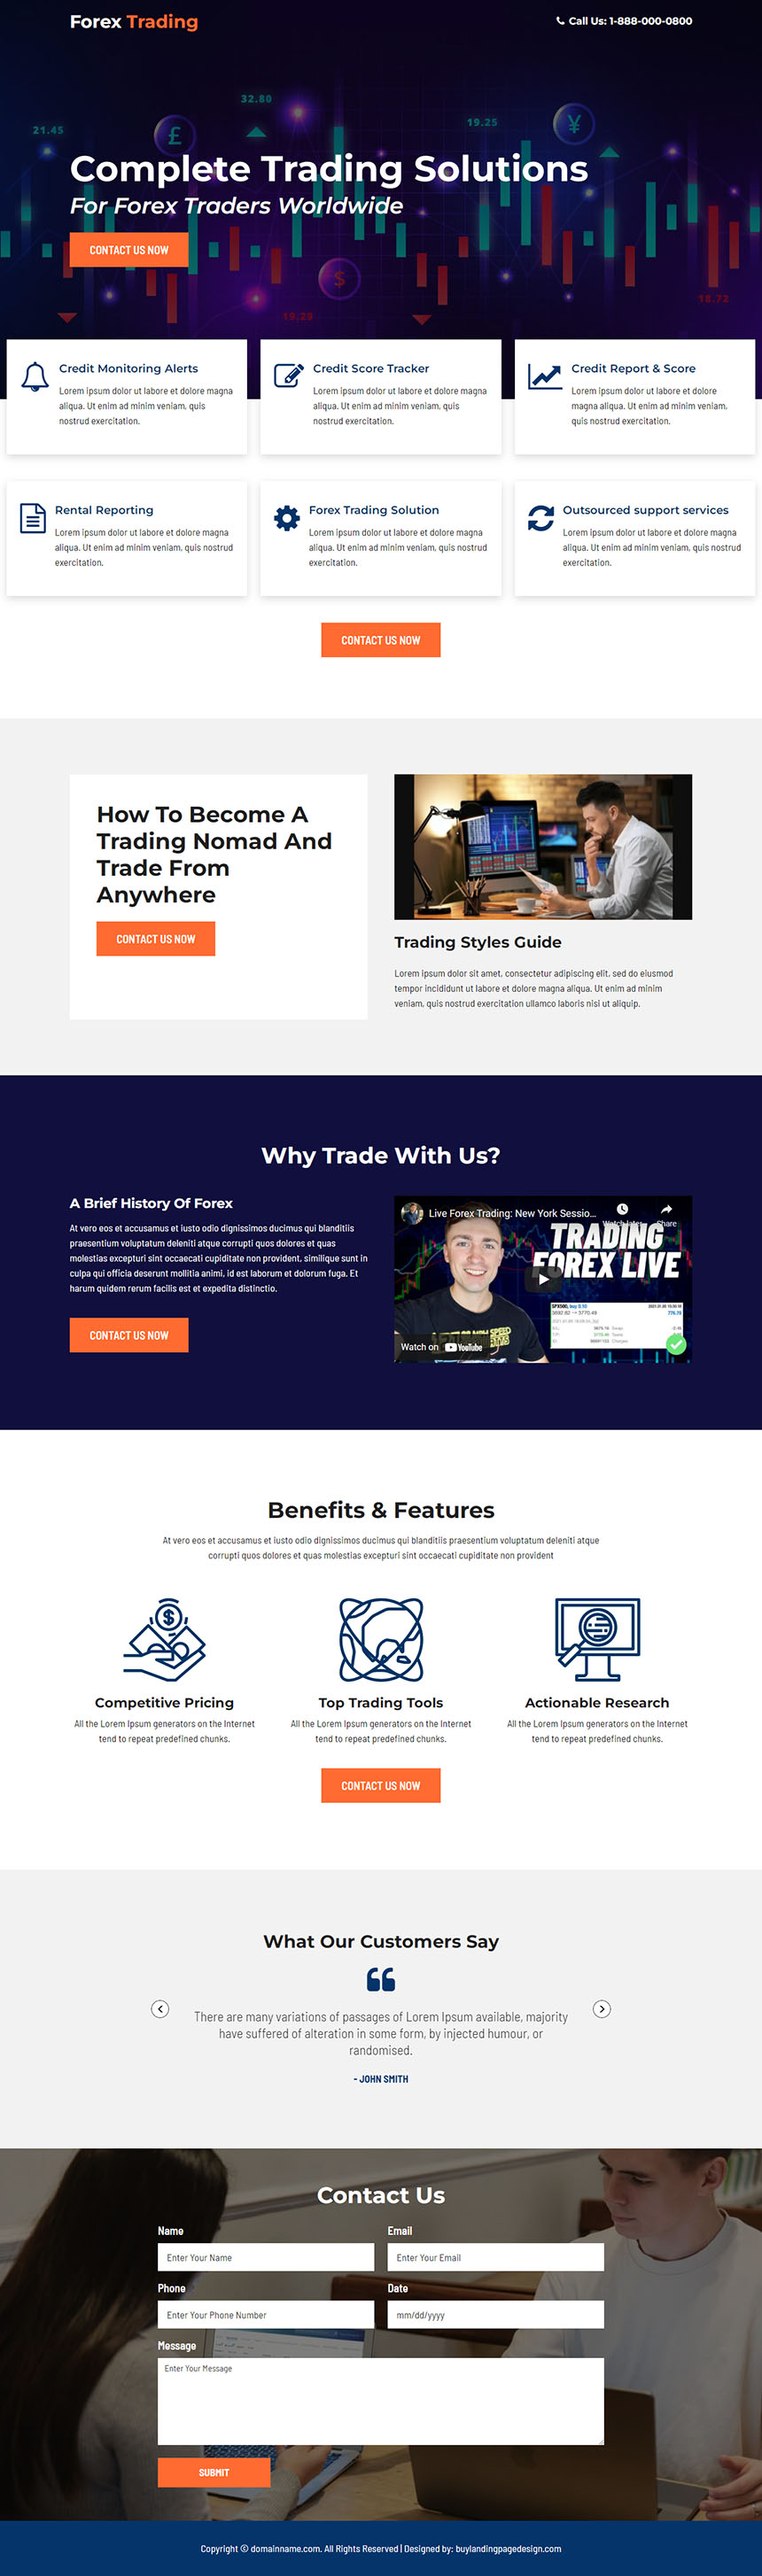 complete trading solutions responsive landing page